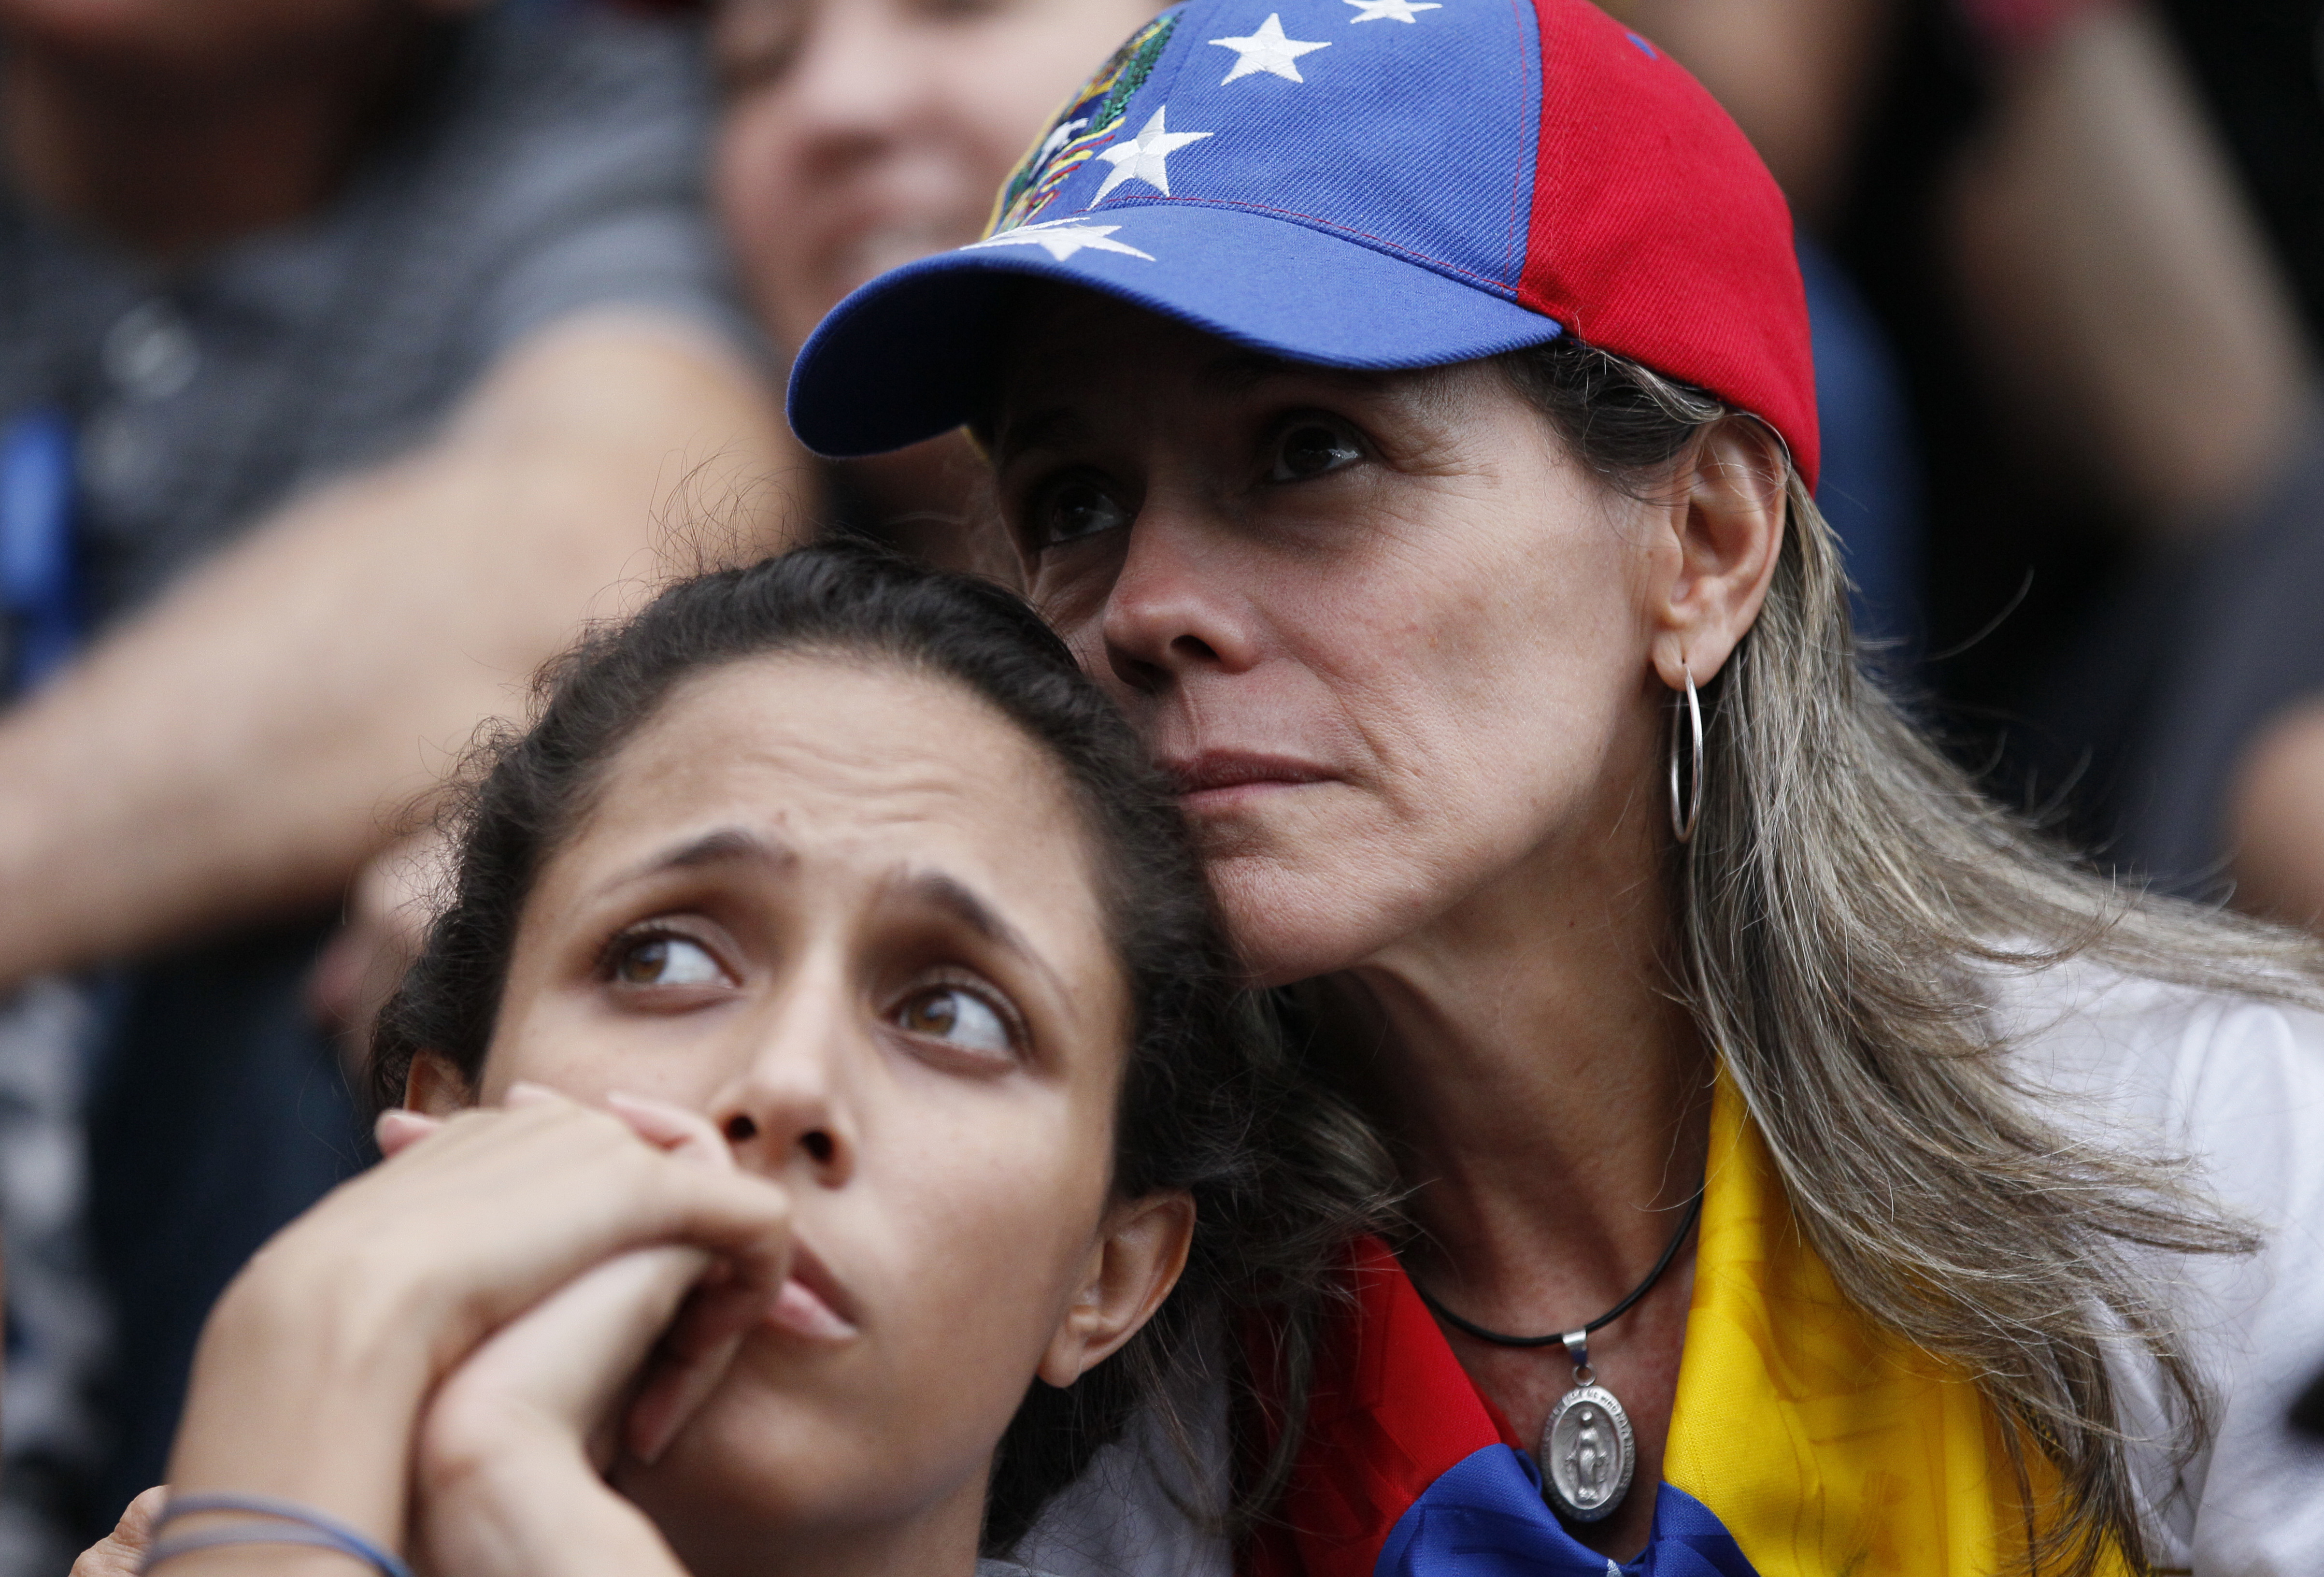 Anti-government demonstrators attend a vigil in honor of those who have been killed during clashes between security forces and demonstrators in Caracas, Venezuela, Monday, July 31, 2017. Many analysts believe Sunday's vote for a newly elected assembly that will rewrite Venezuela’s constitution will catalyze yet more disturbances in a country that has seen four months of street protests in which at least 125 people have died. (AP Photo/Ariana Cubillos)